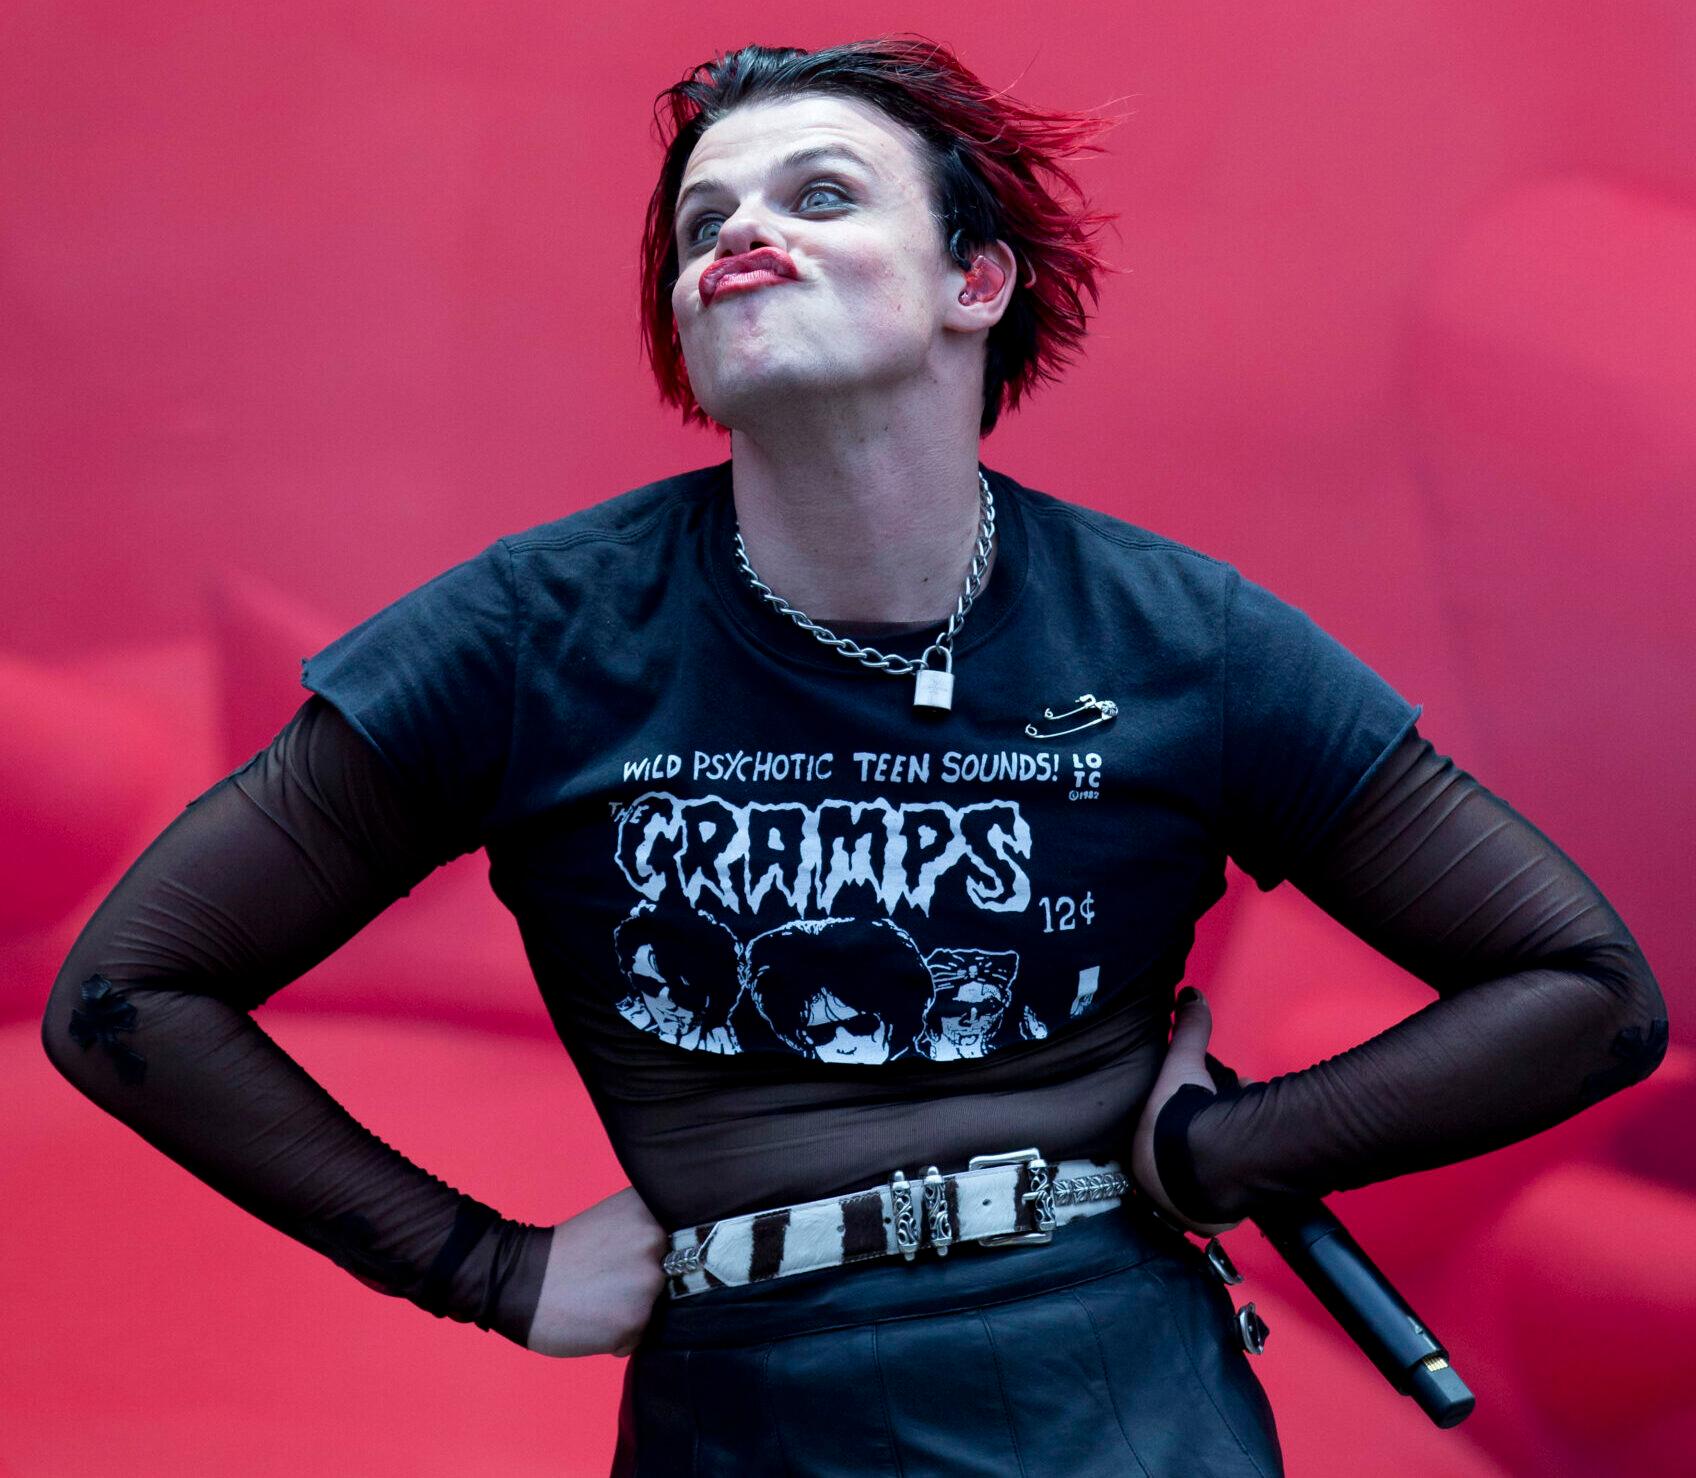 Yungblud Performs on the main stage west at this years reading festival